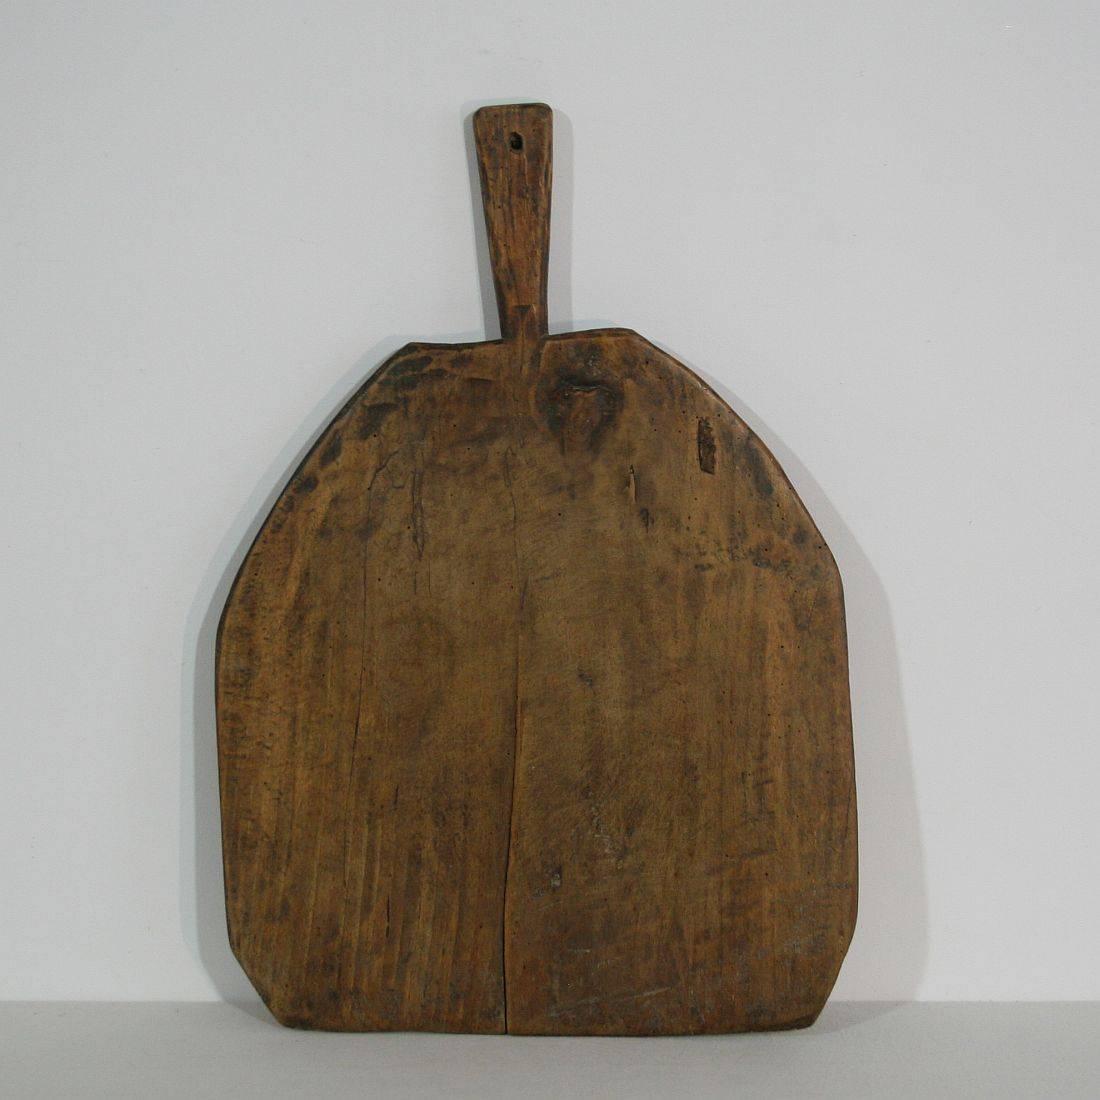 French Provincial Collection of Three Rare French 19th Century, Wooden Chopping/Cutting Boards